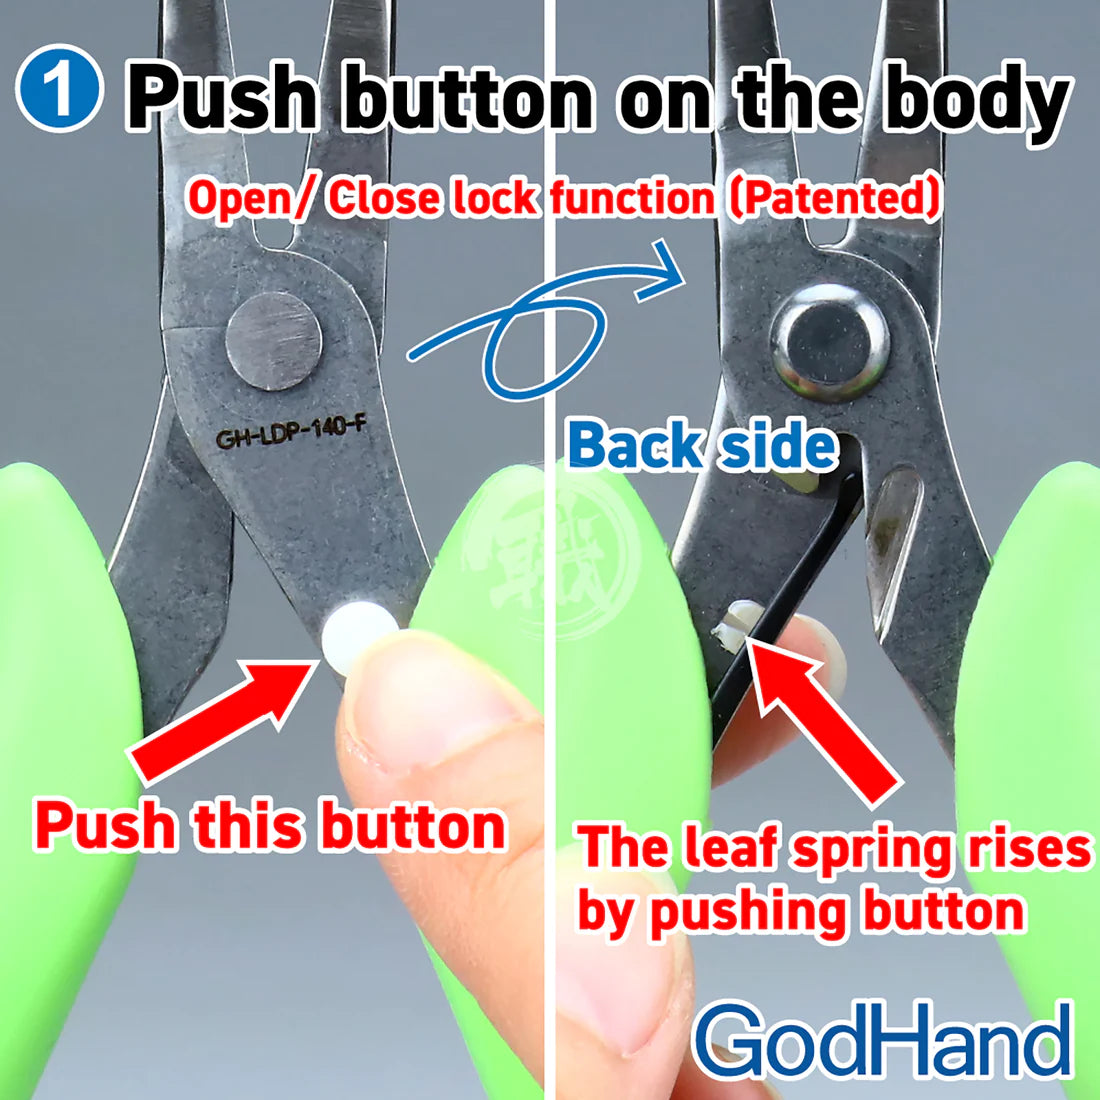 GodHand - Le-Dio Bent Nose Pliers